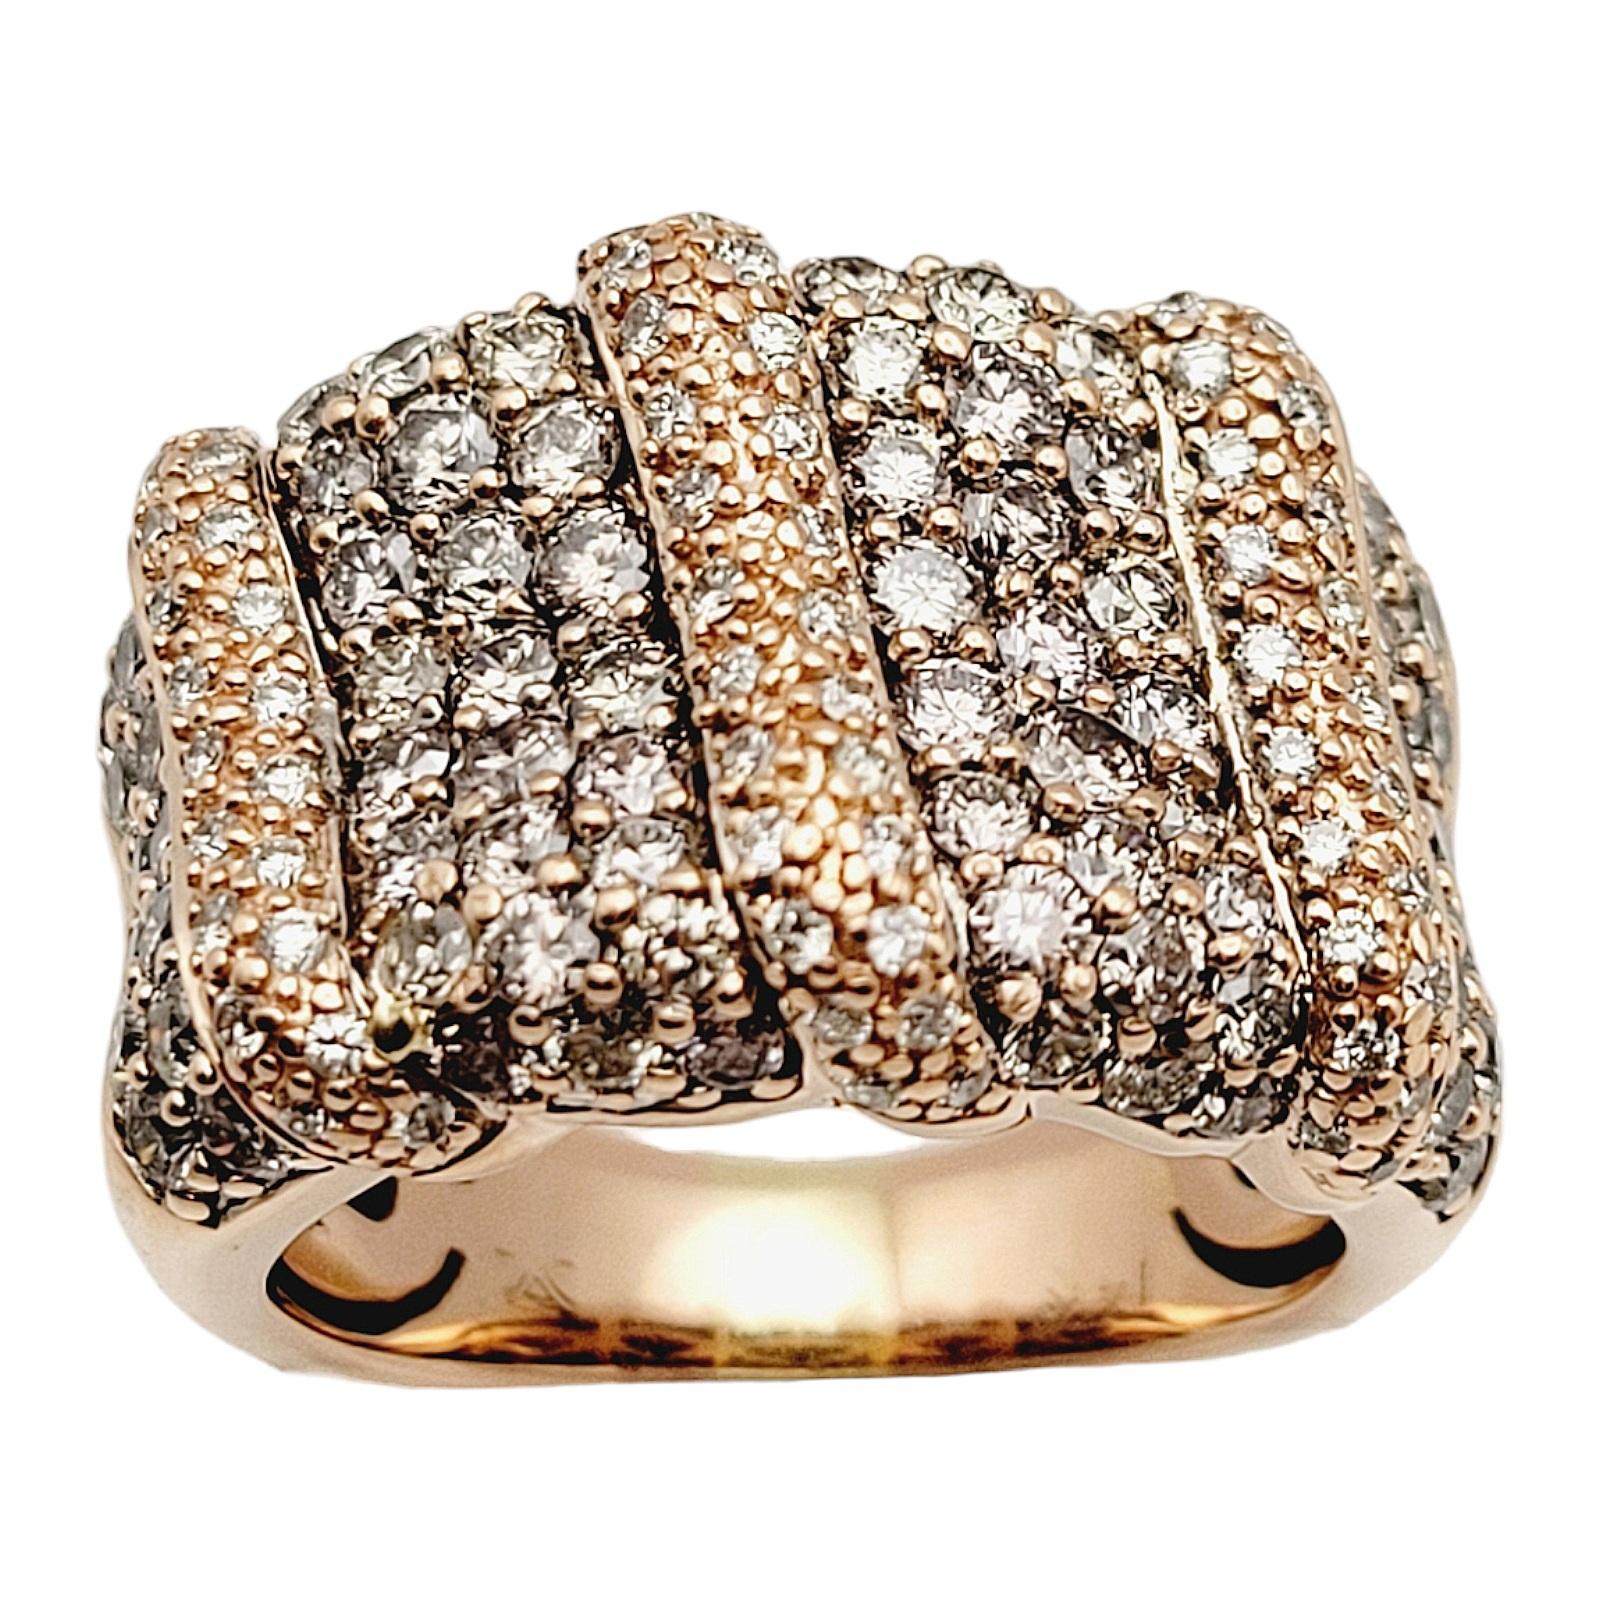 Ring Size: 6.25

This dazzling diamond pave band ring sparkles from finger to finger. This incredible ring features 83 gorgeous light brown pave diamonds S-T in color and SI-2 to I-2 in clarity. There are also 70 round brilliant white diamonds set